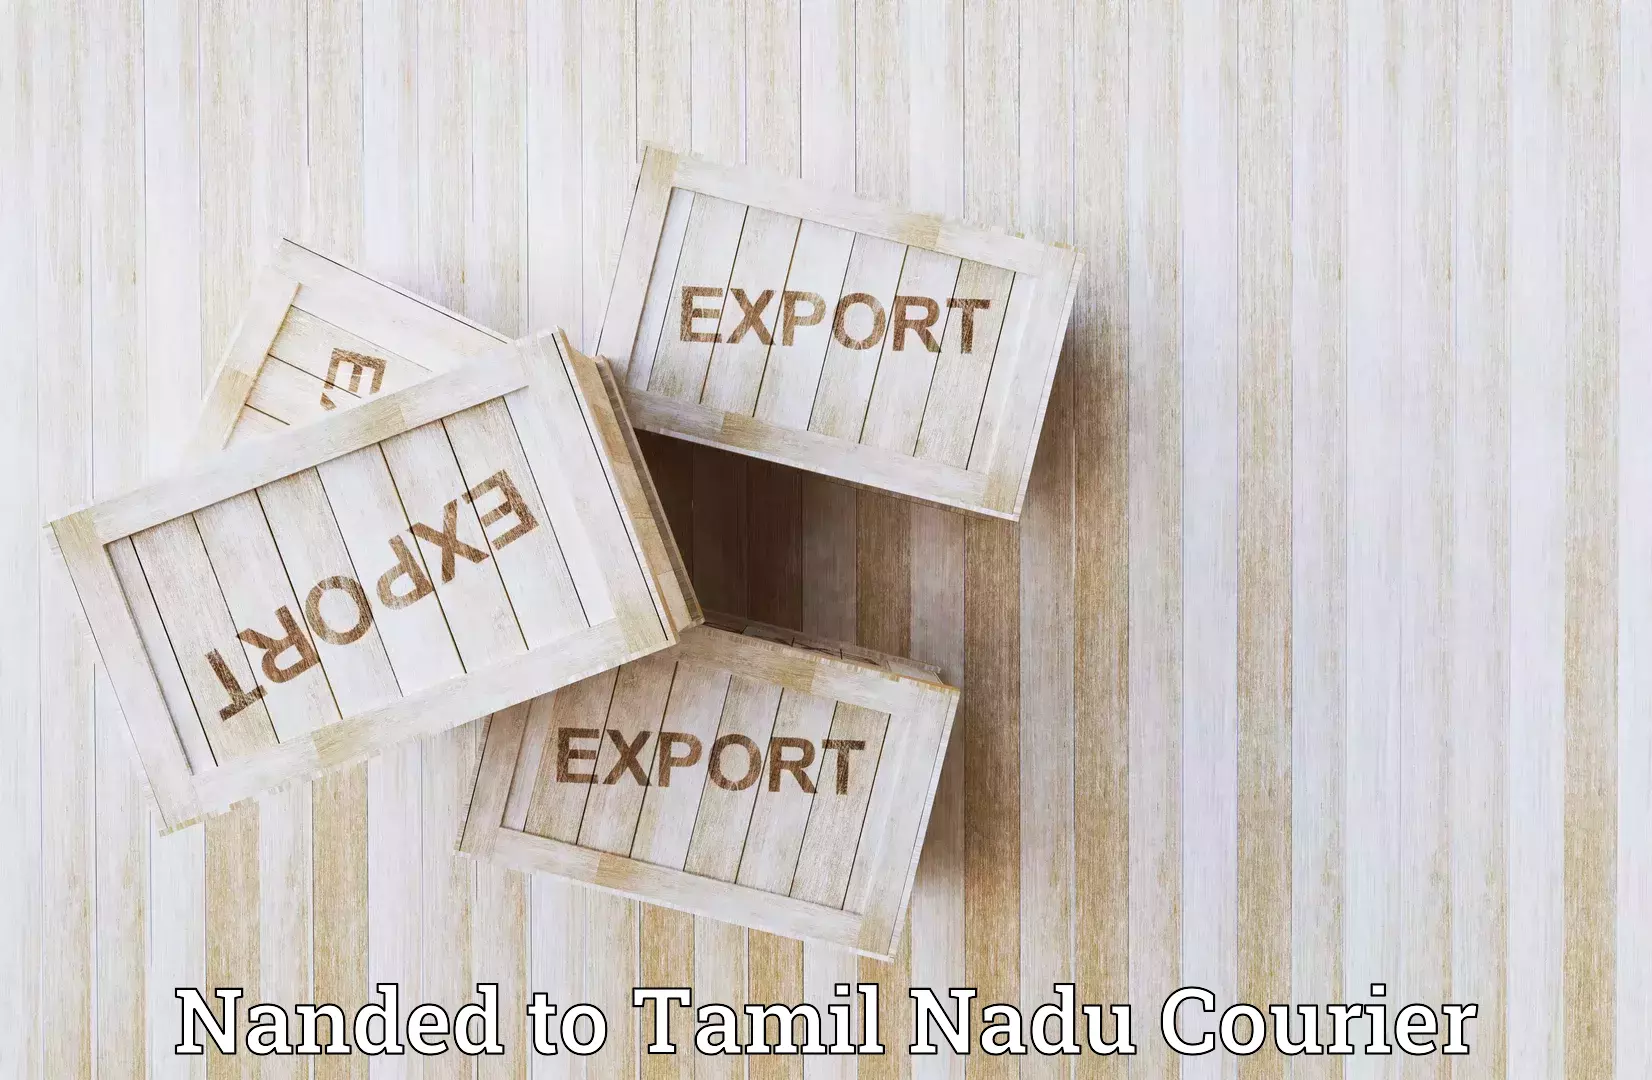 Global shipping solutions Nanded to Tamil Nadu